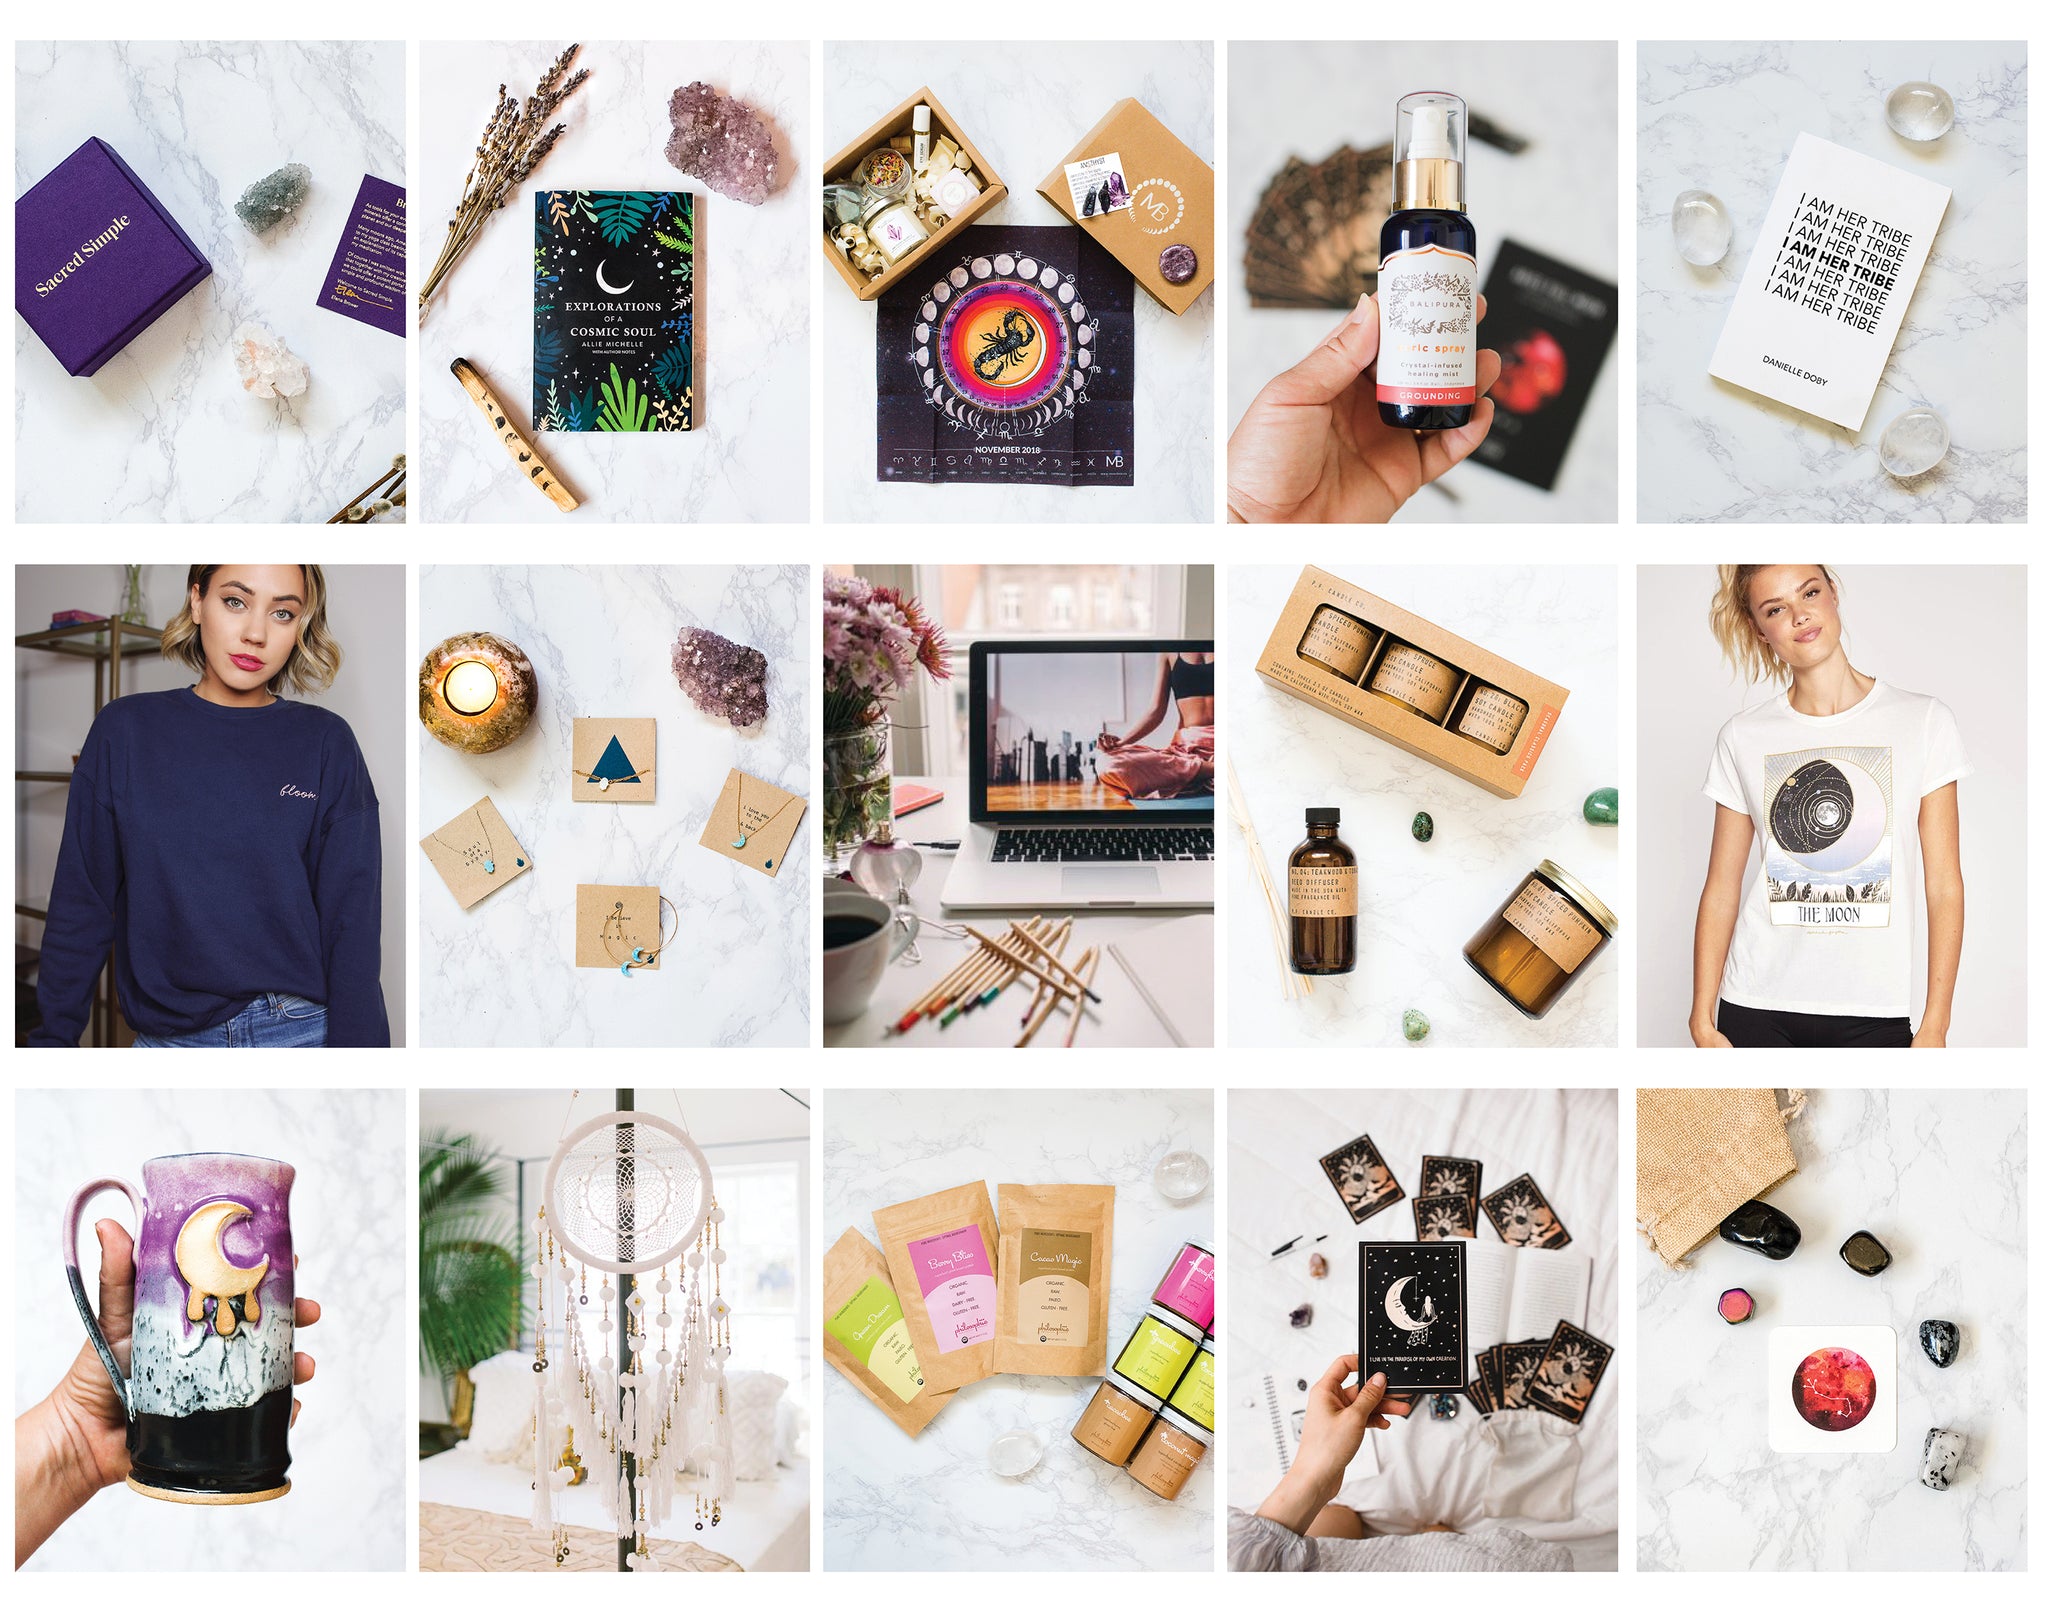 Spirit daughter's holiday gift guide 2018